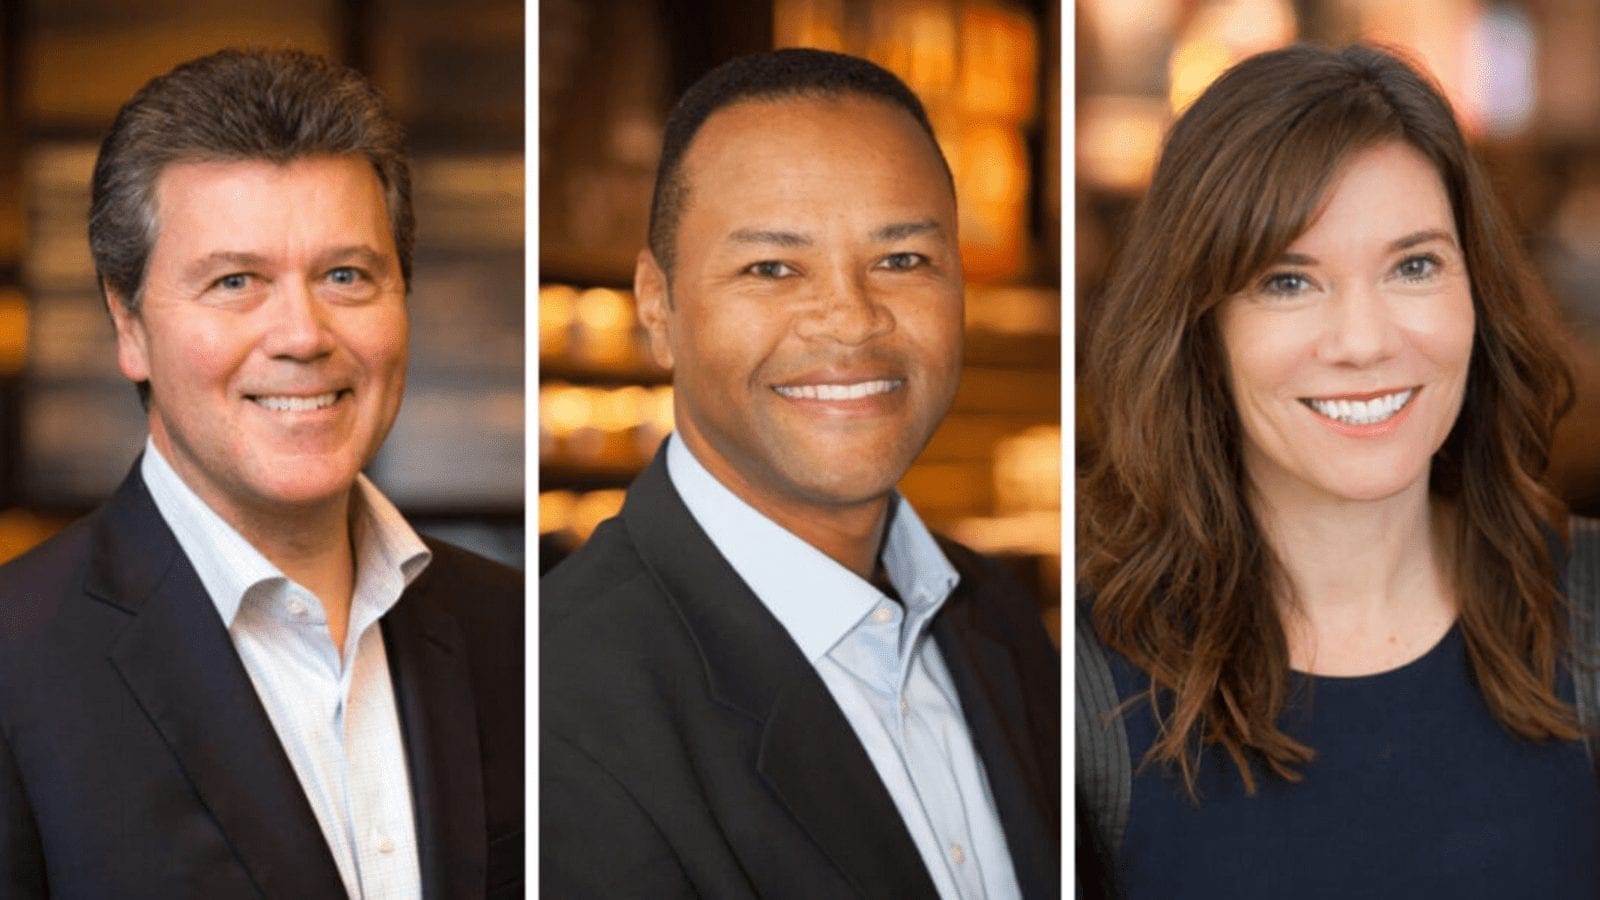 Starbucks makes 3 executive appointments to support purpose-driven growth